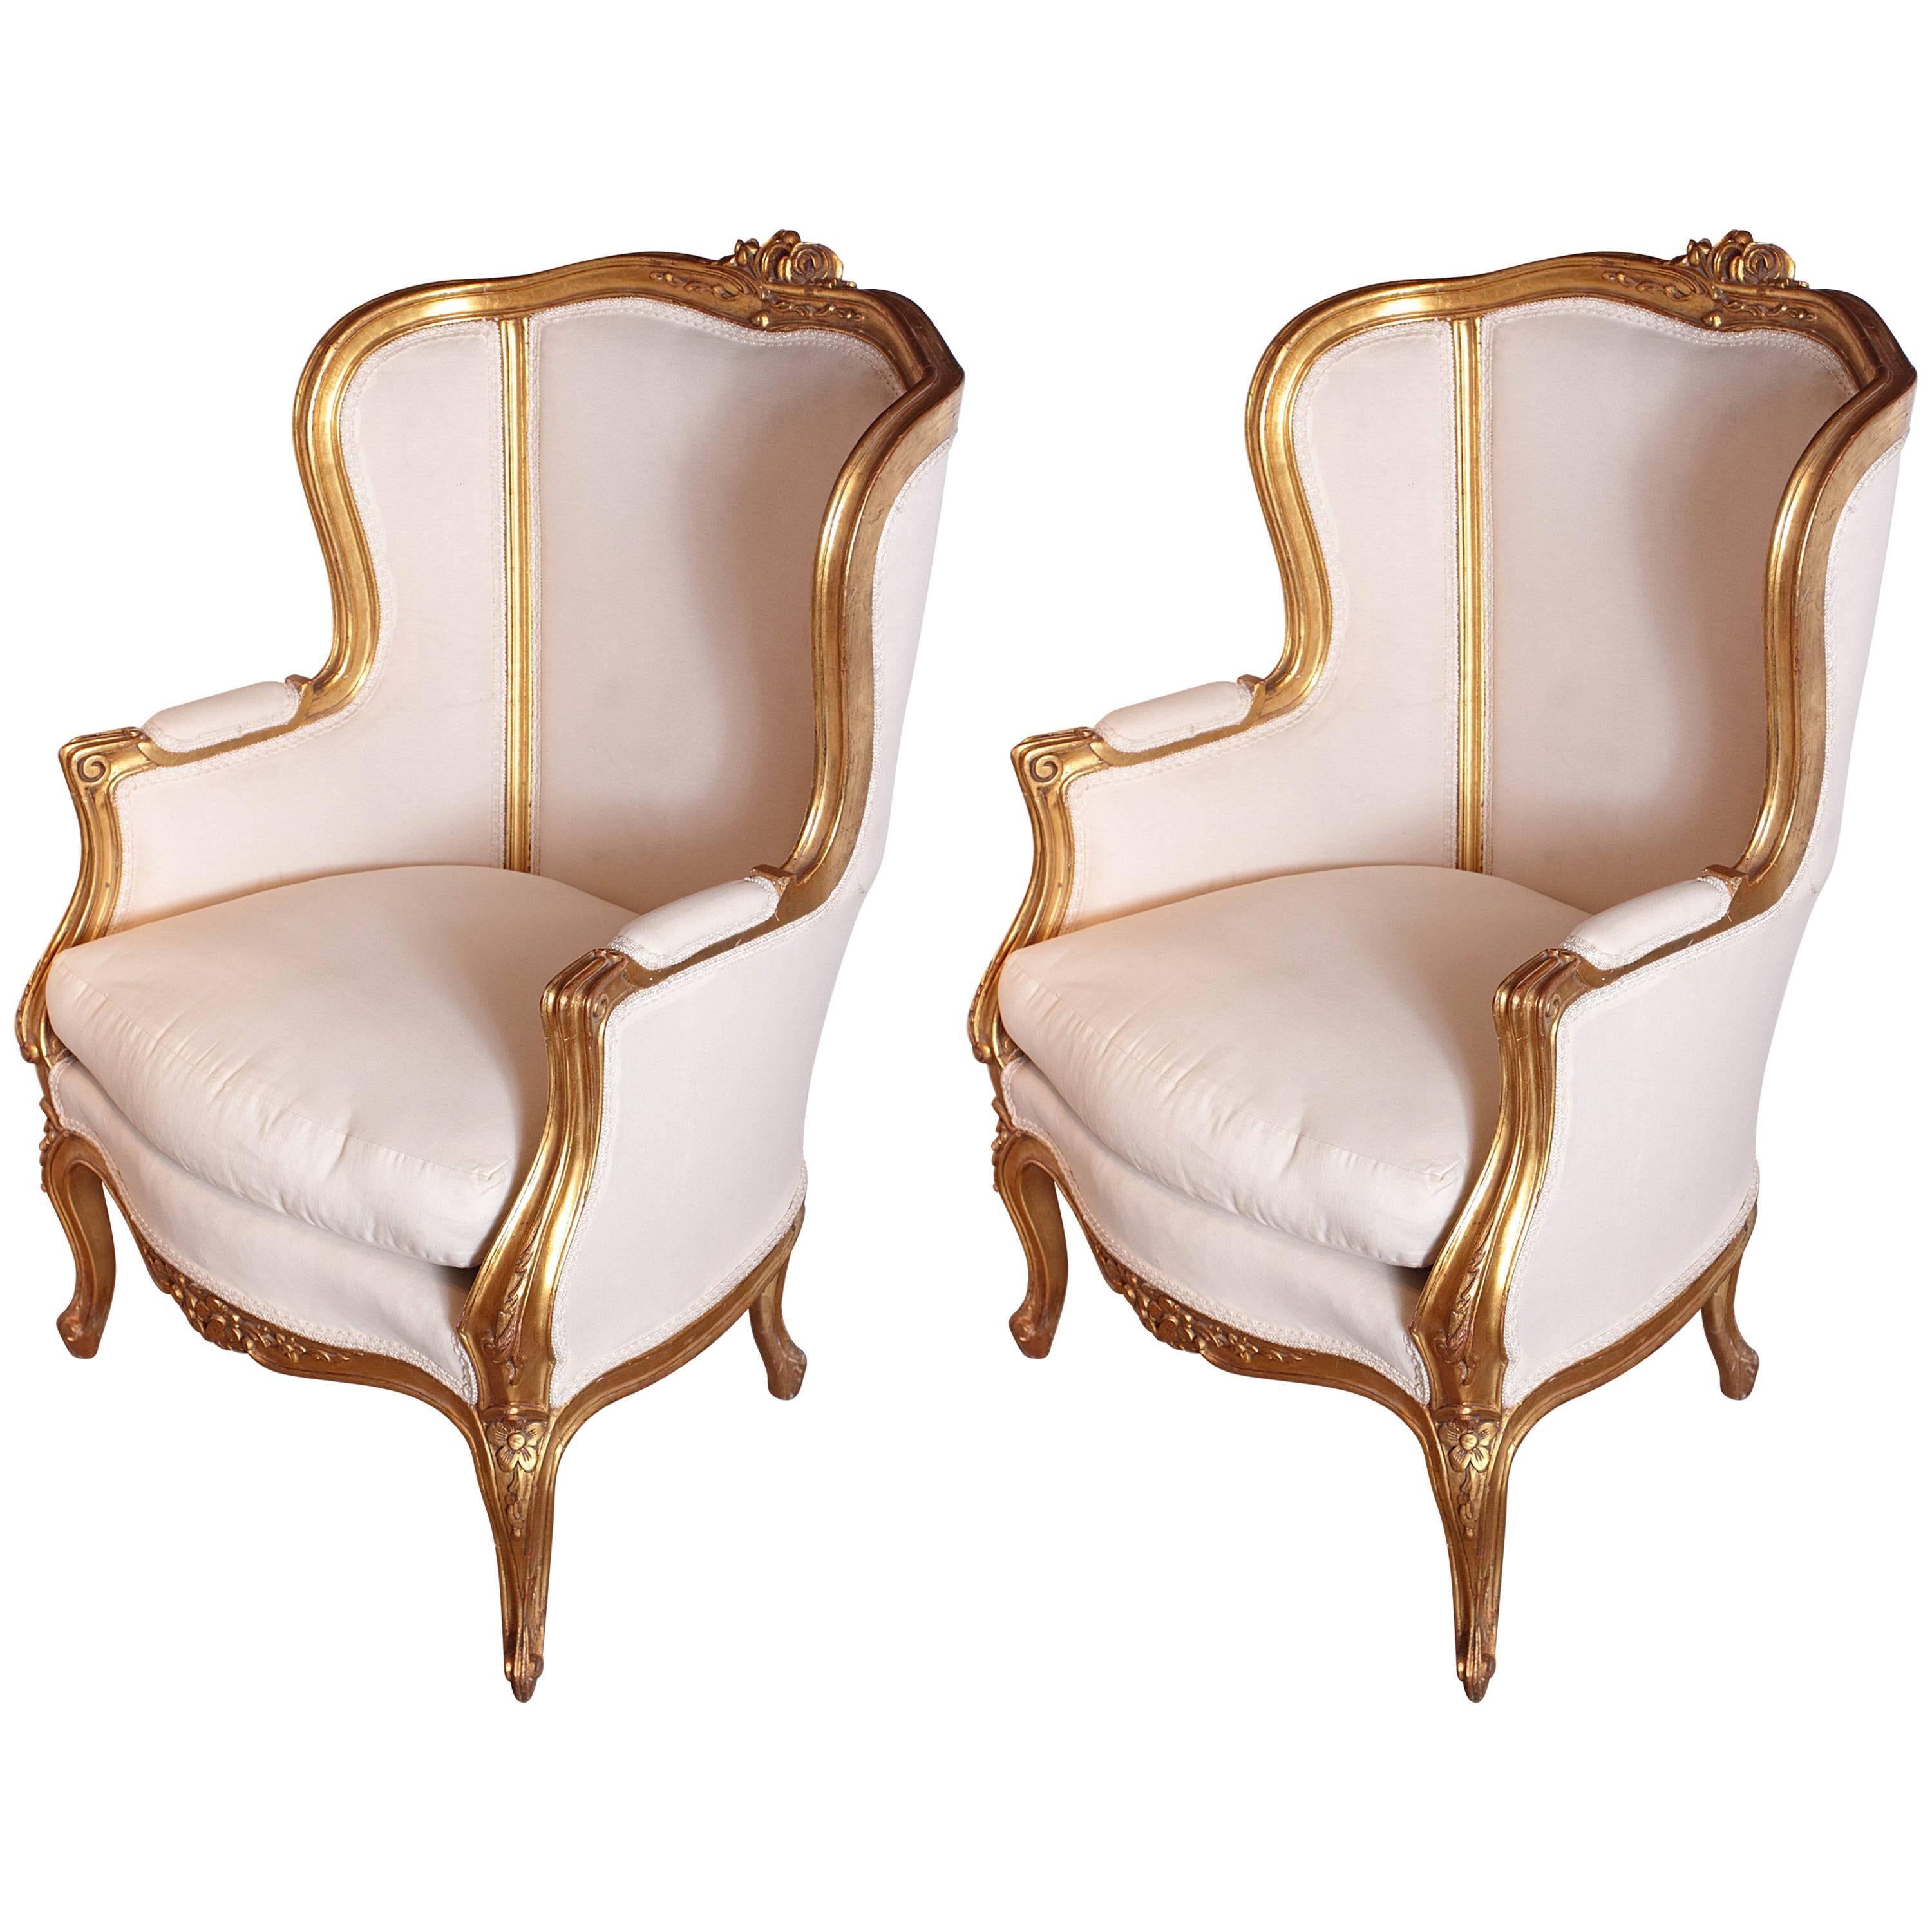 Pair of 19th Century French Gilt Louis XV Bergeres